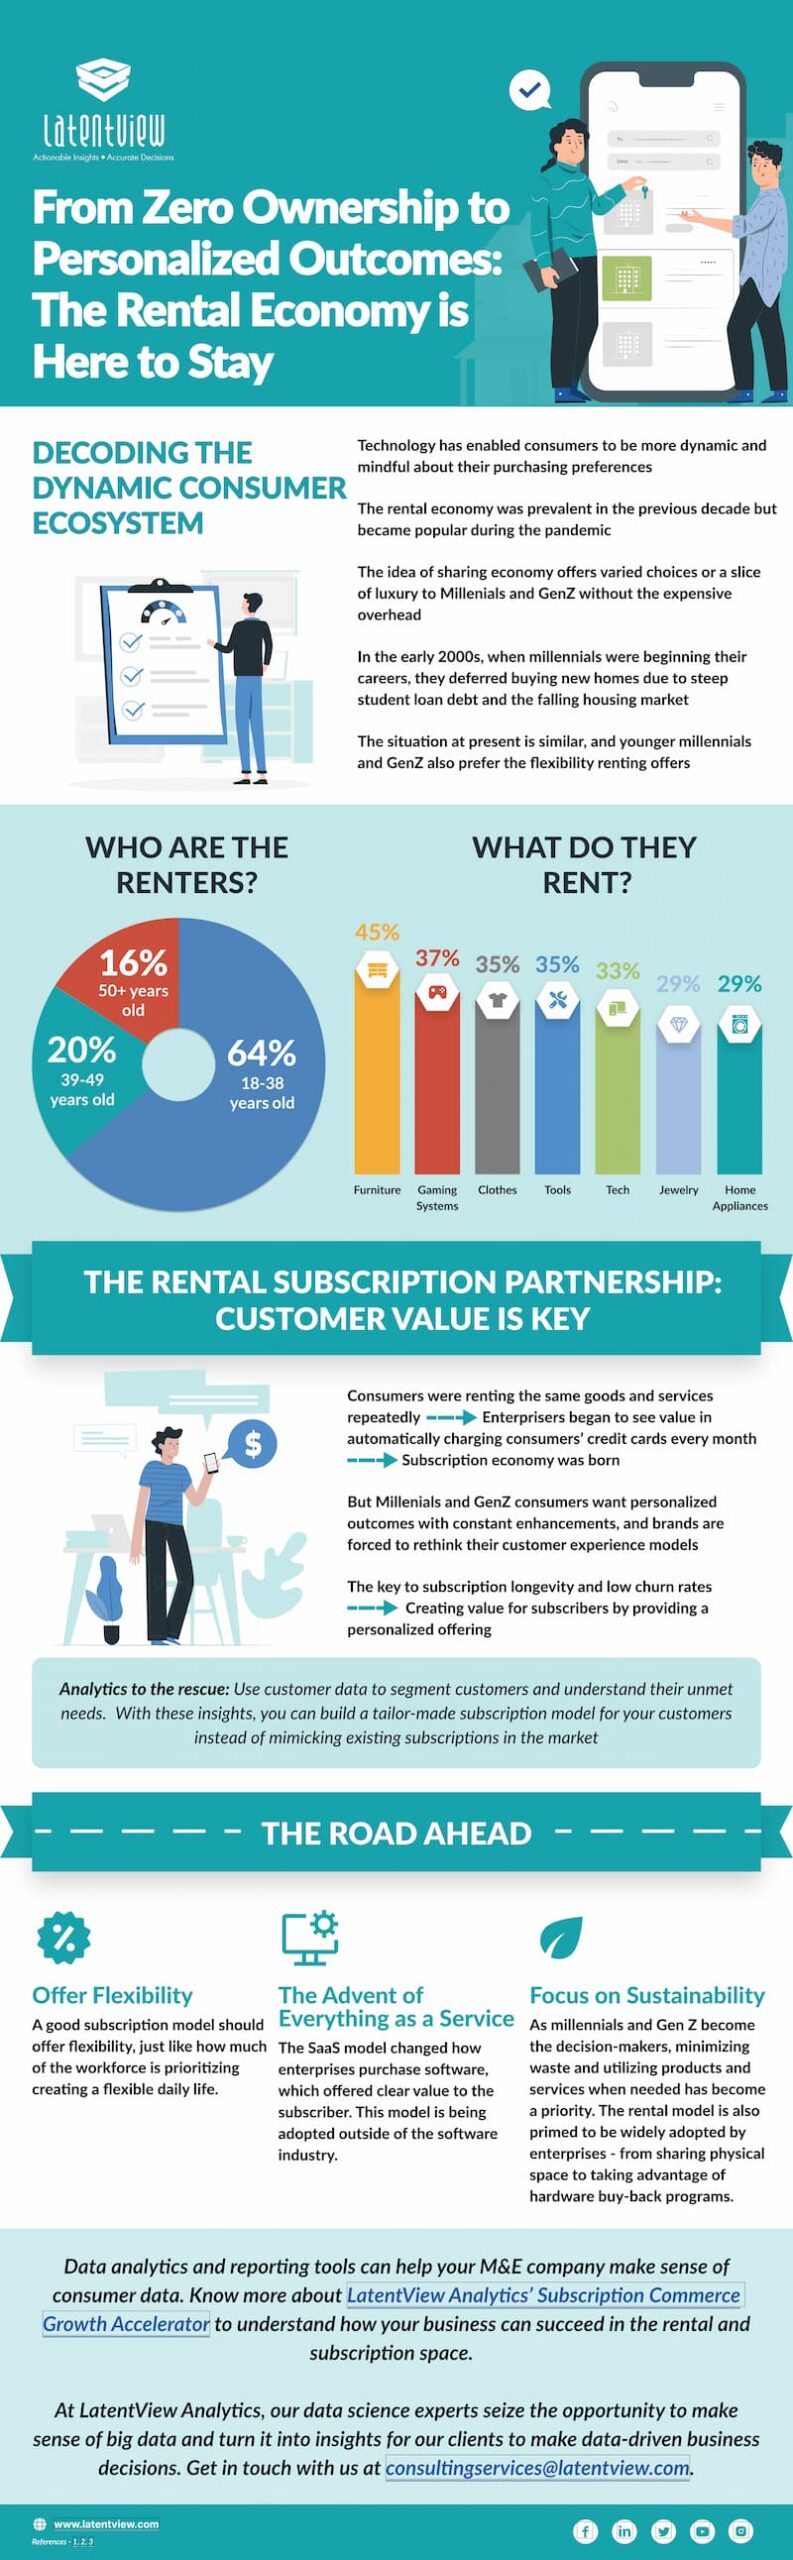 From Zero Ownership to Personalized Outcomes- The Rental Economy is Here to Stay